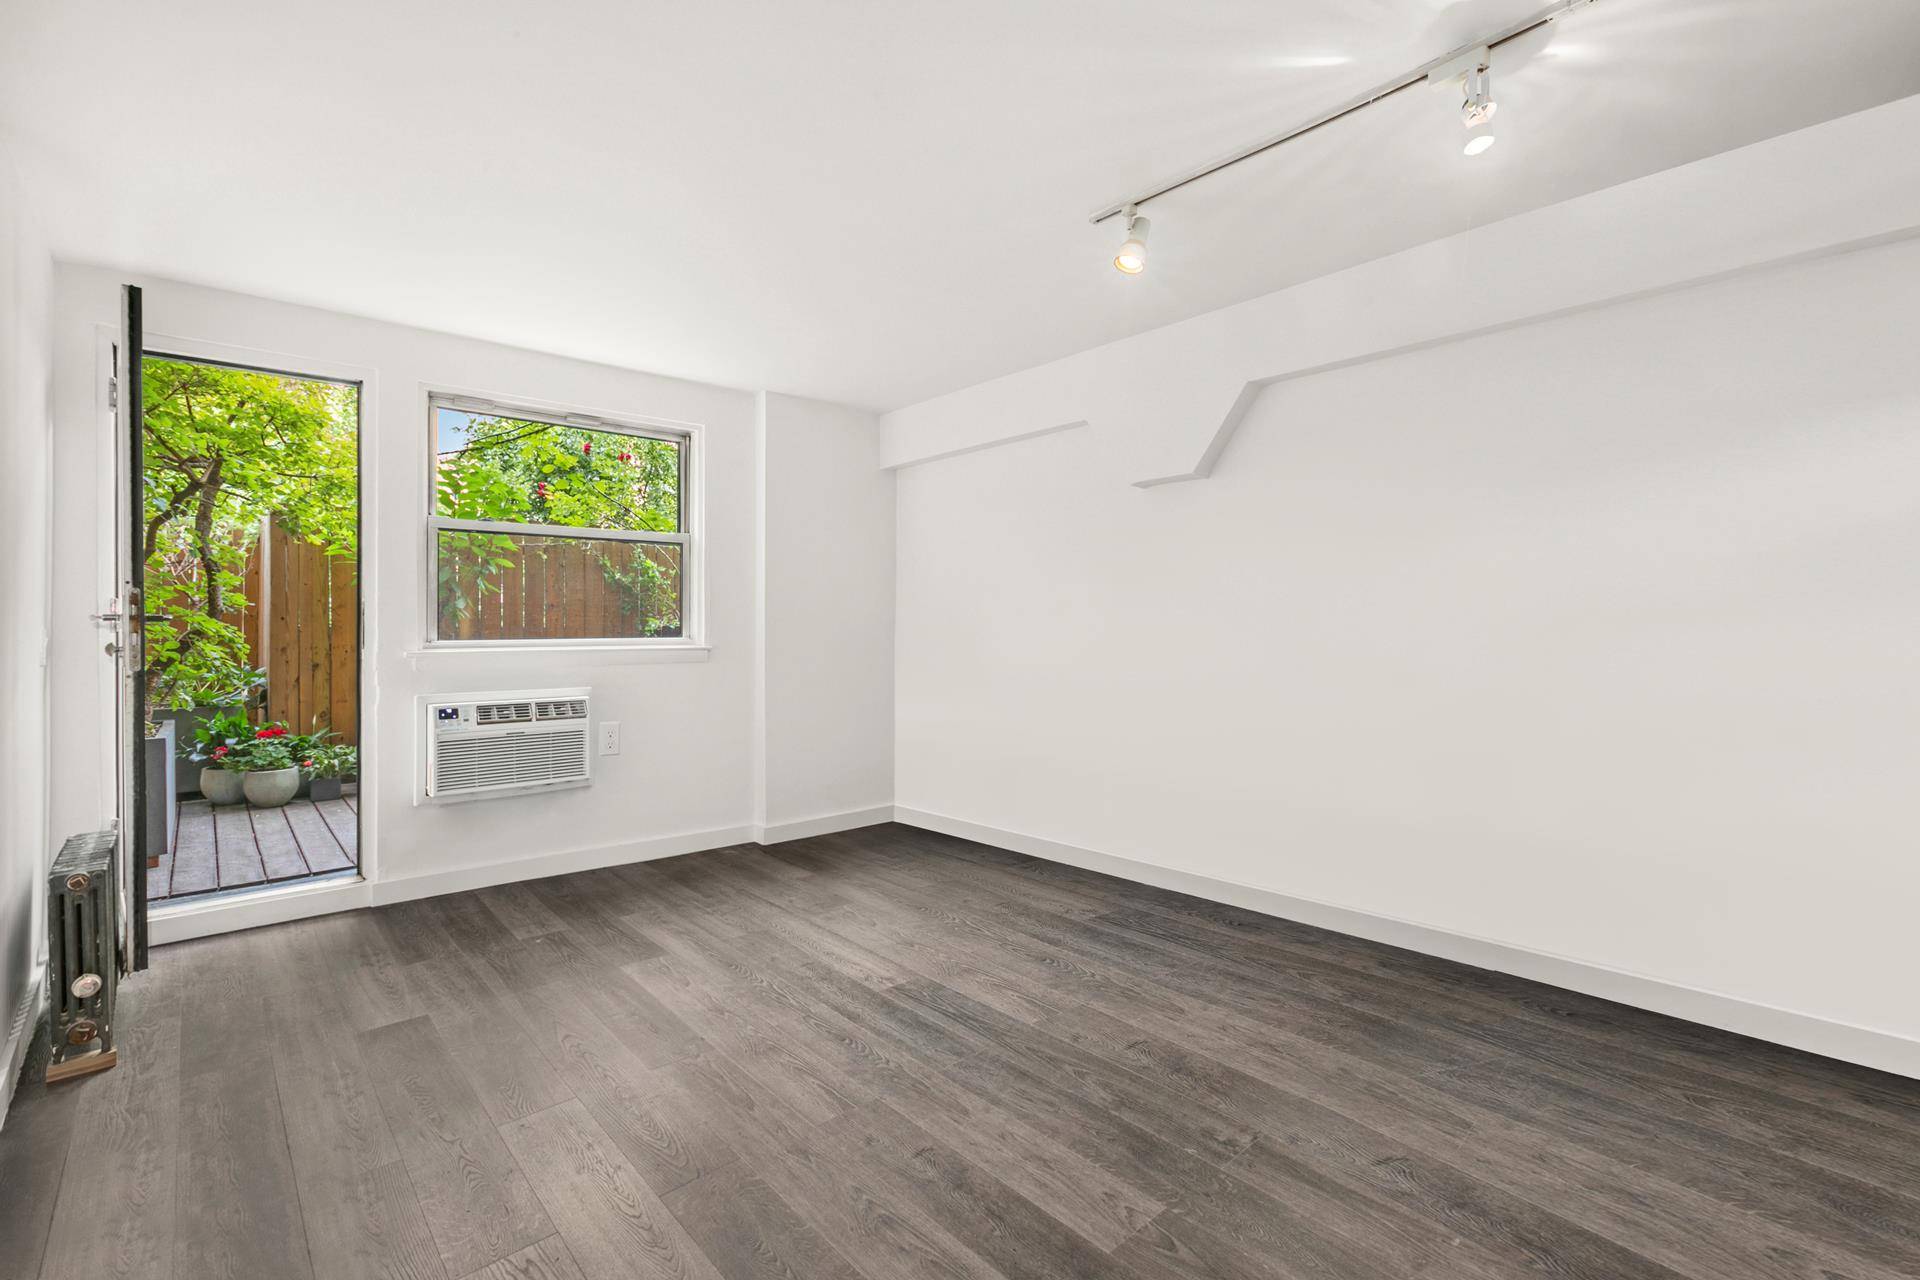 Welcome to this stunning and spacious loft like studio apartment and your very own private terrace with a touch of sophistication, nestled in the heart of Greenwich Village.